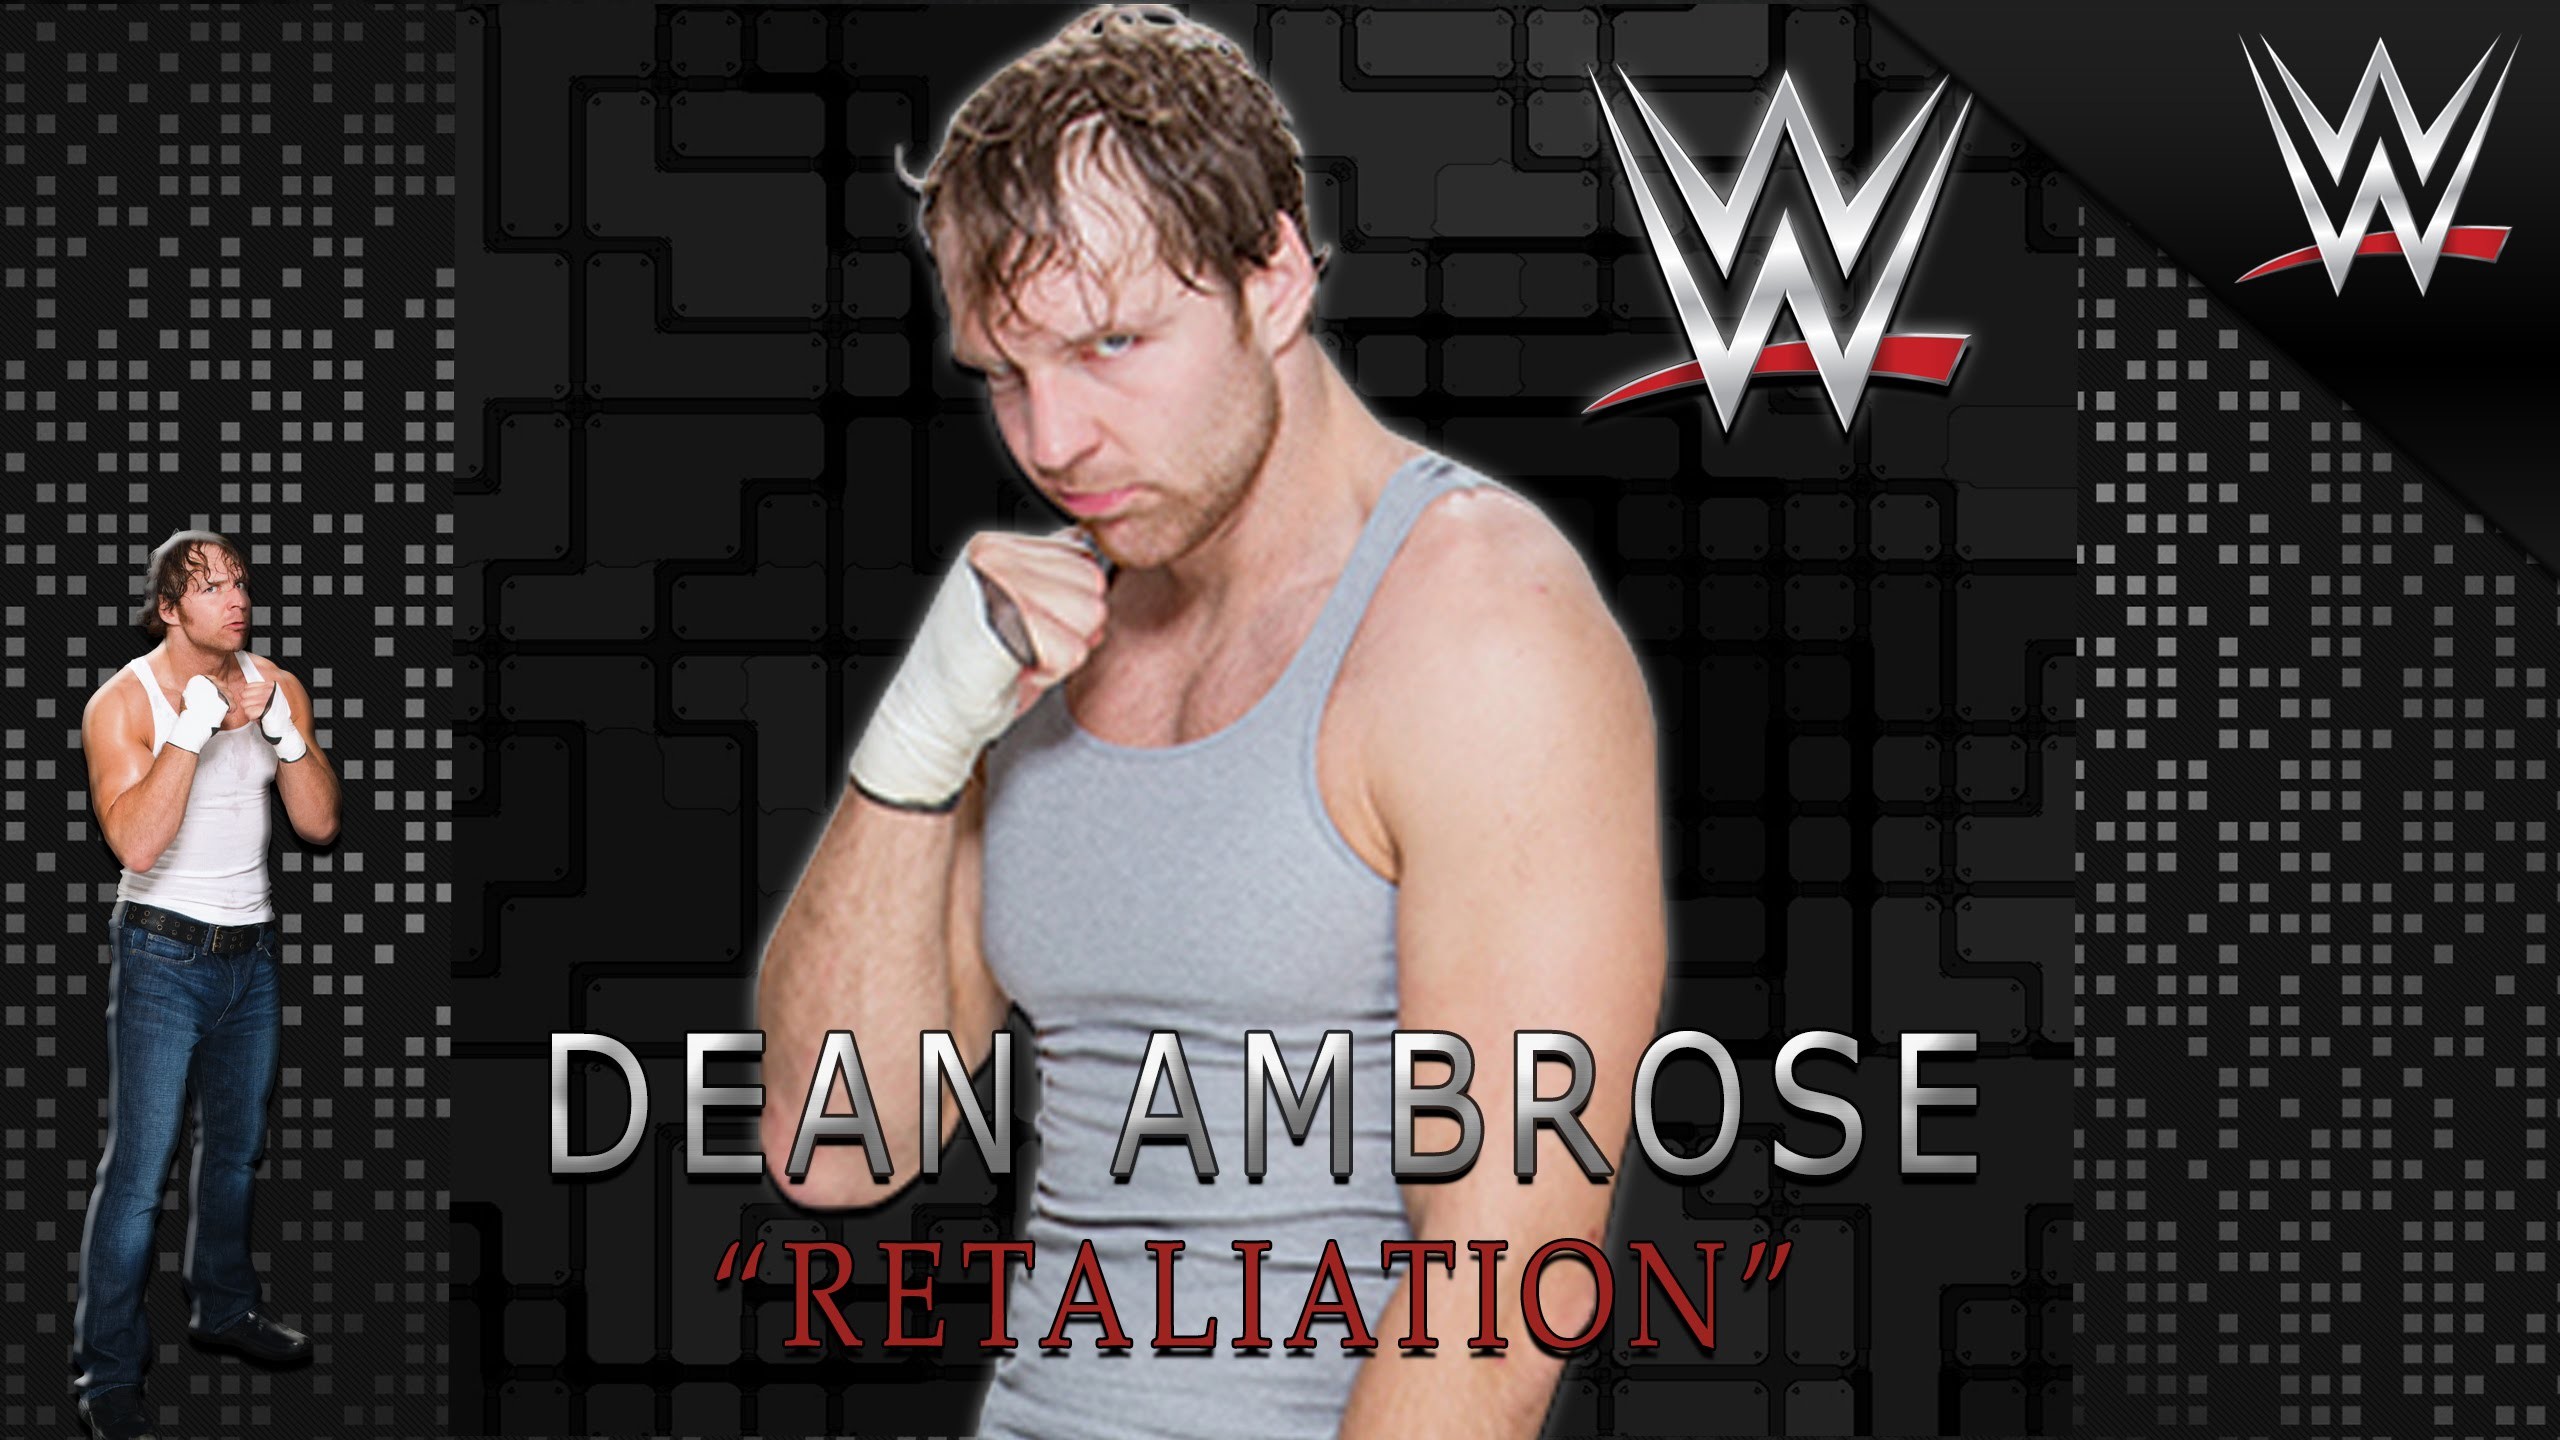 2560x1440 WWE | Dean Ambrose 4th Theme Song "Retaliation" [V2] (Arena Effect) +  Download 2015 - YouTube